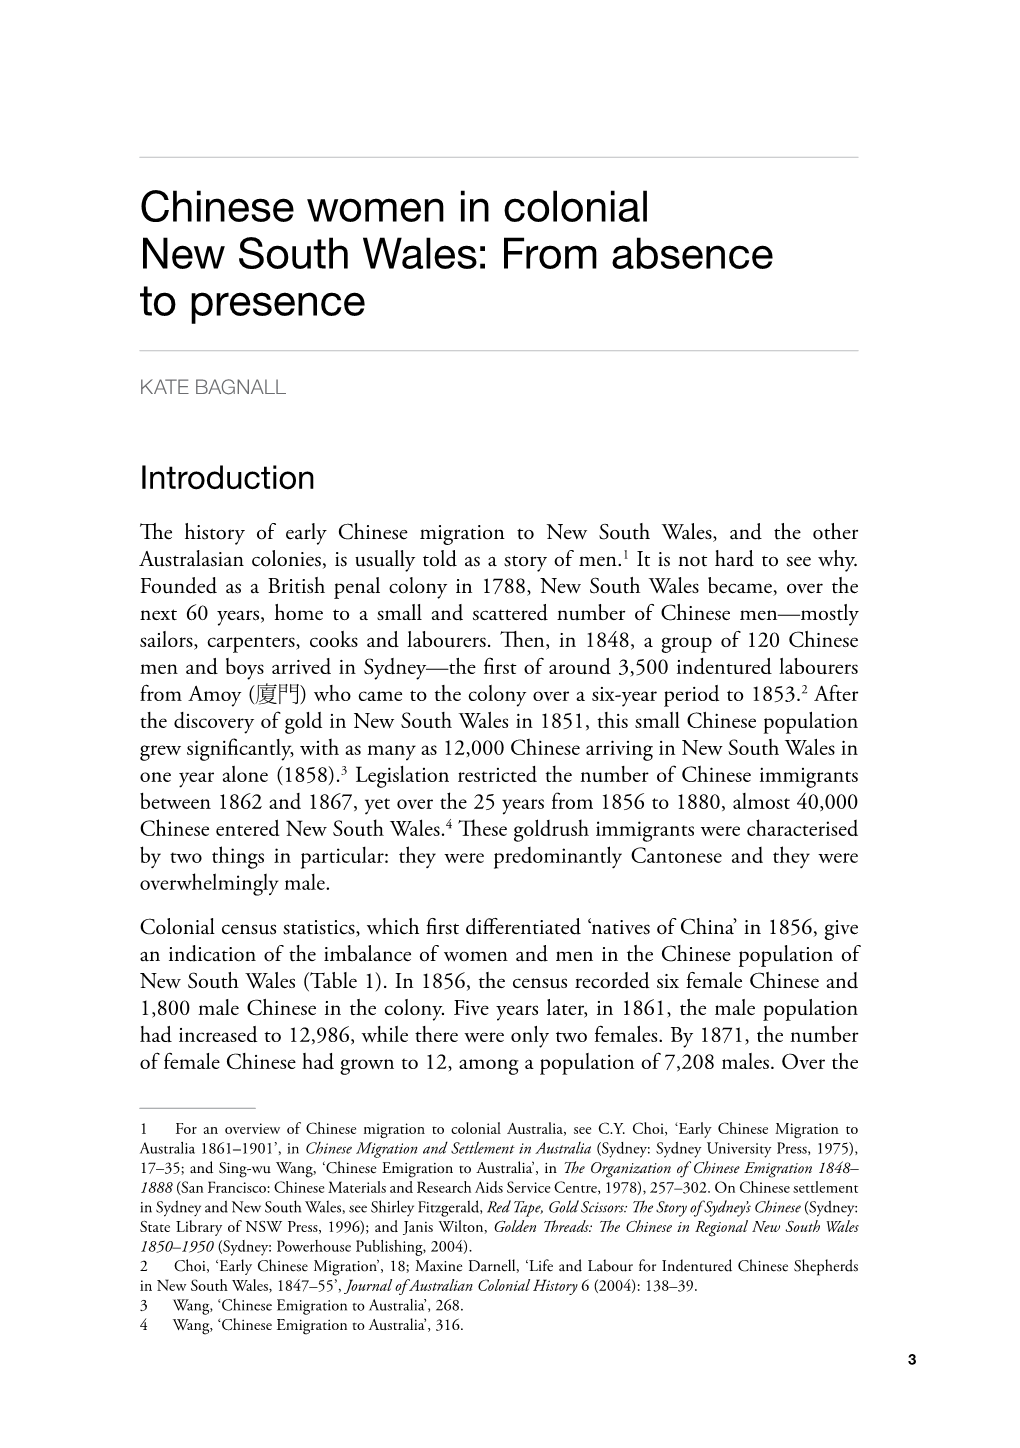 Chinese Women in Colonial New South Wales: from Absence to Presence